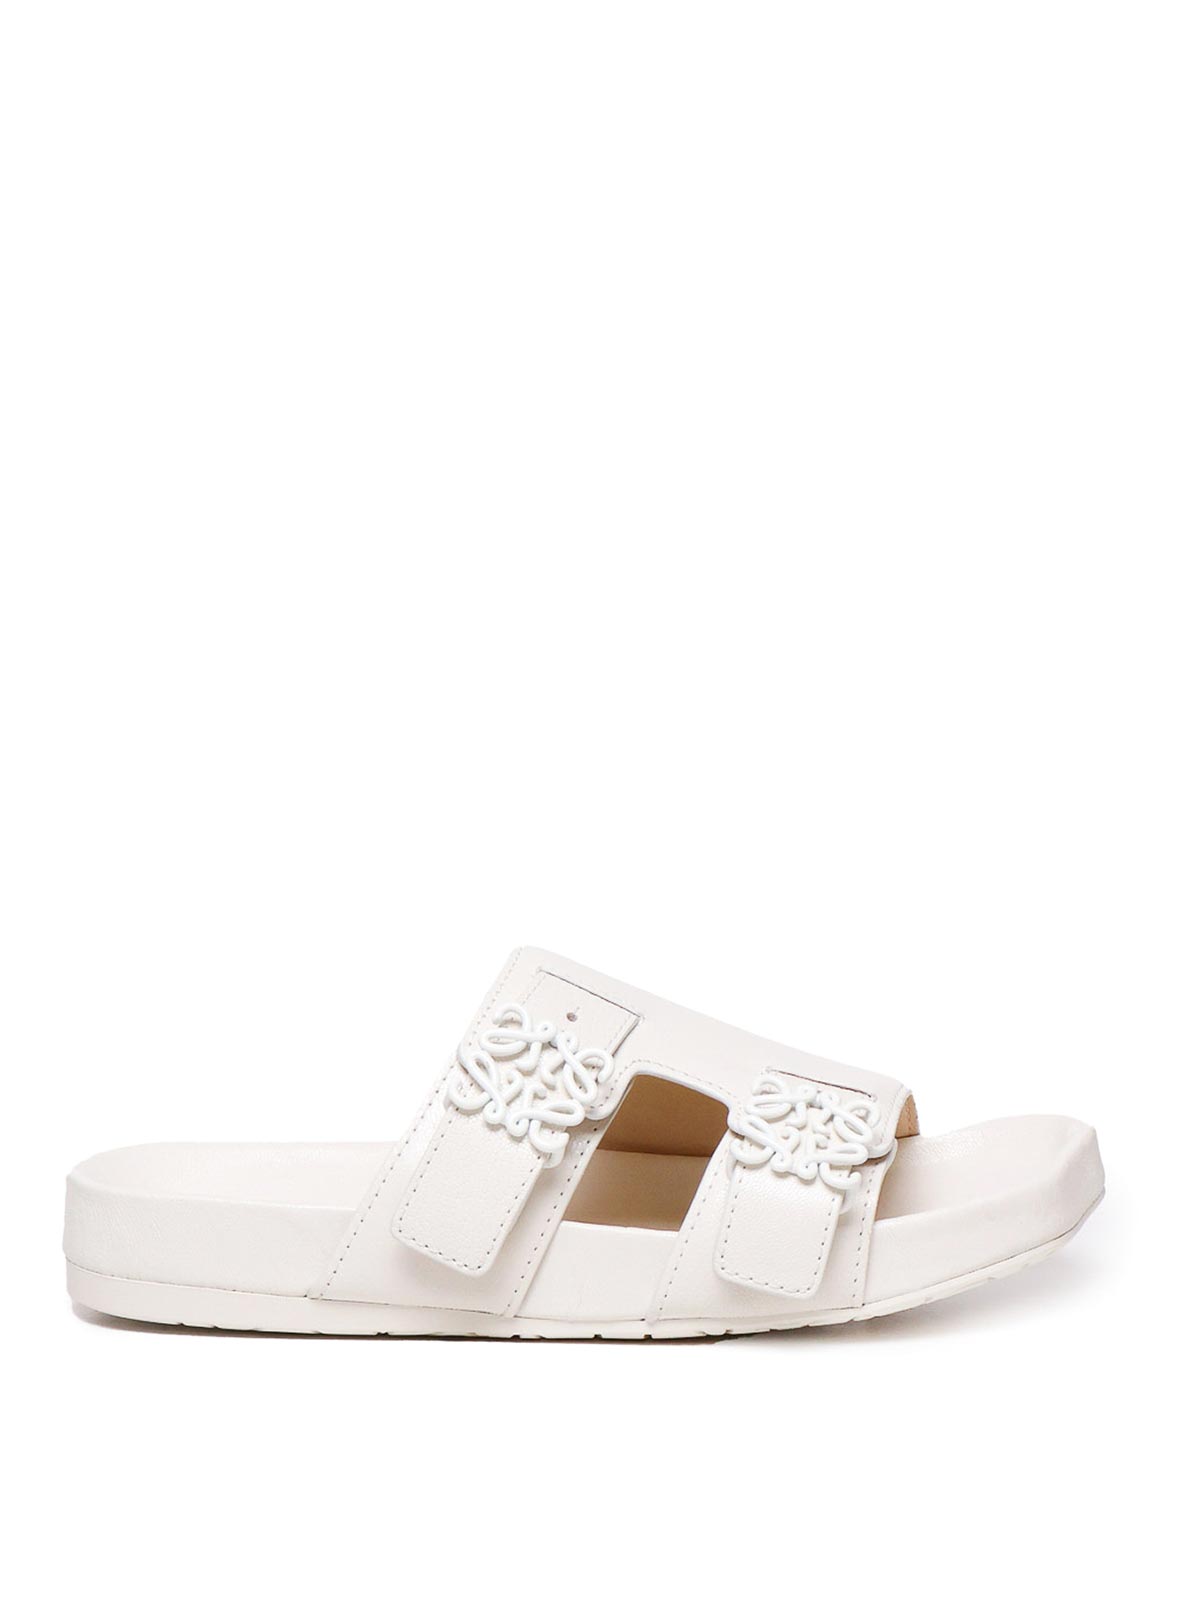 Loewe Leather Sandals In White